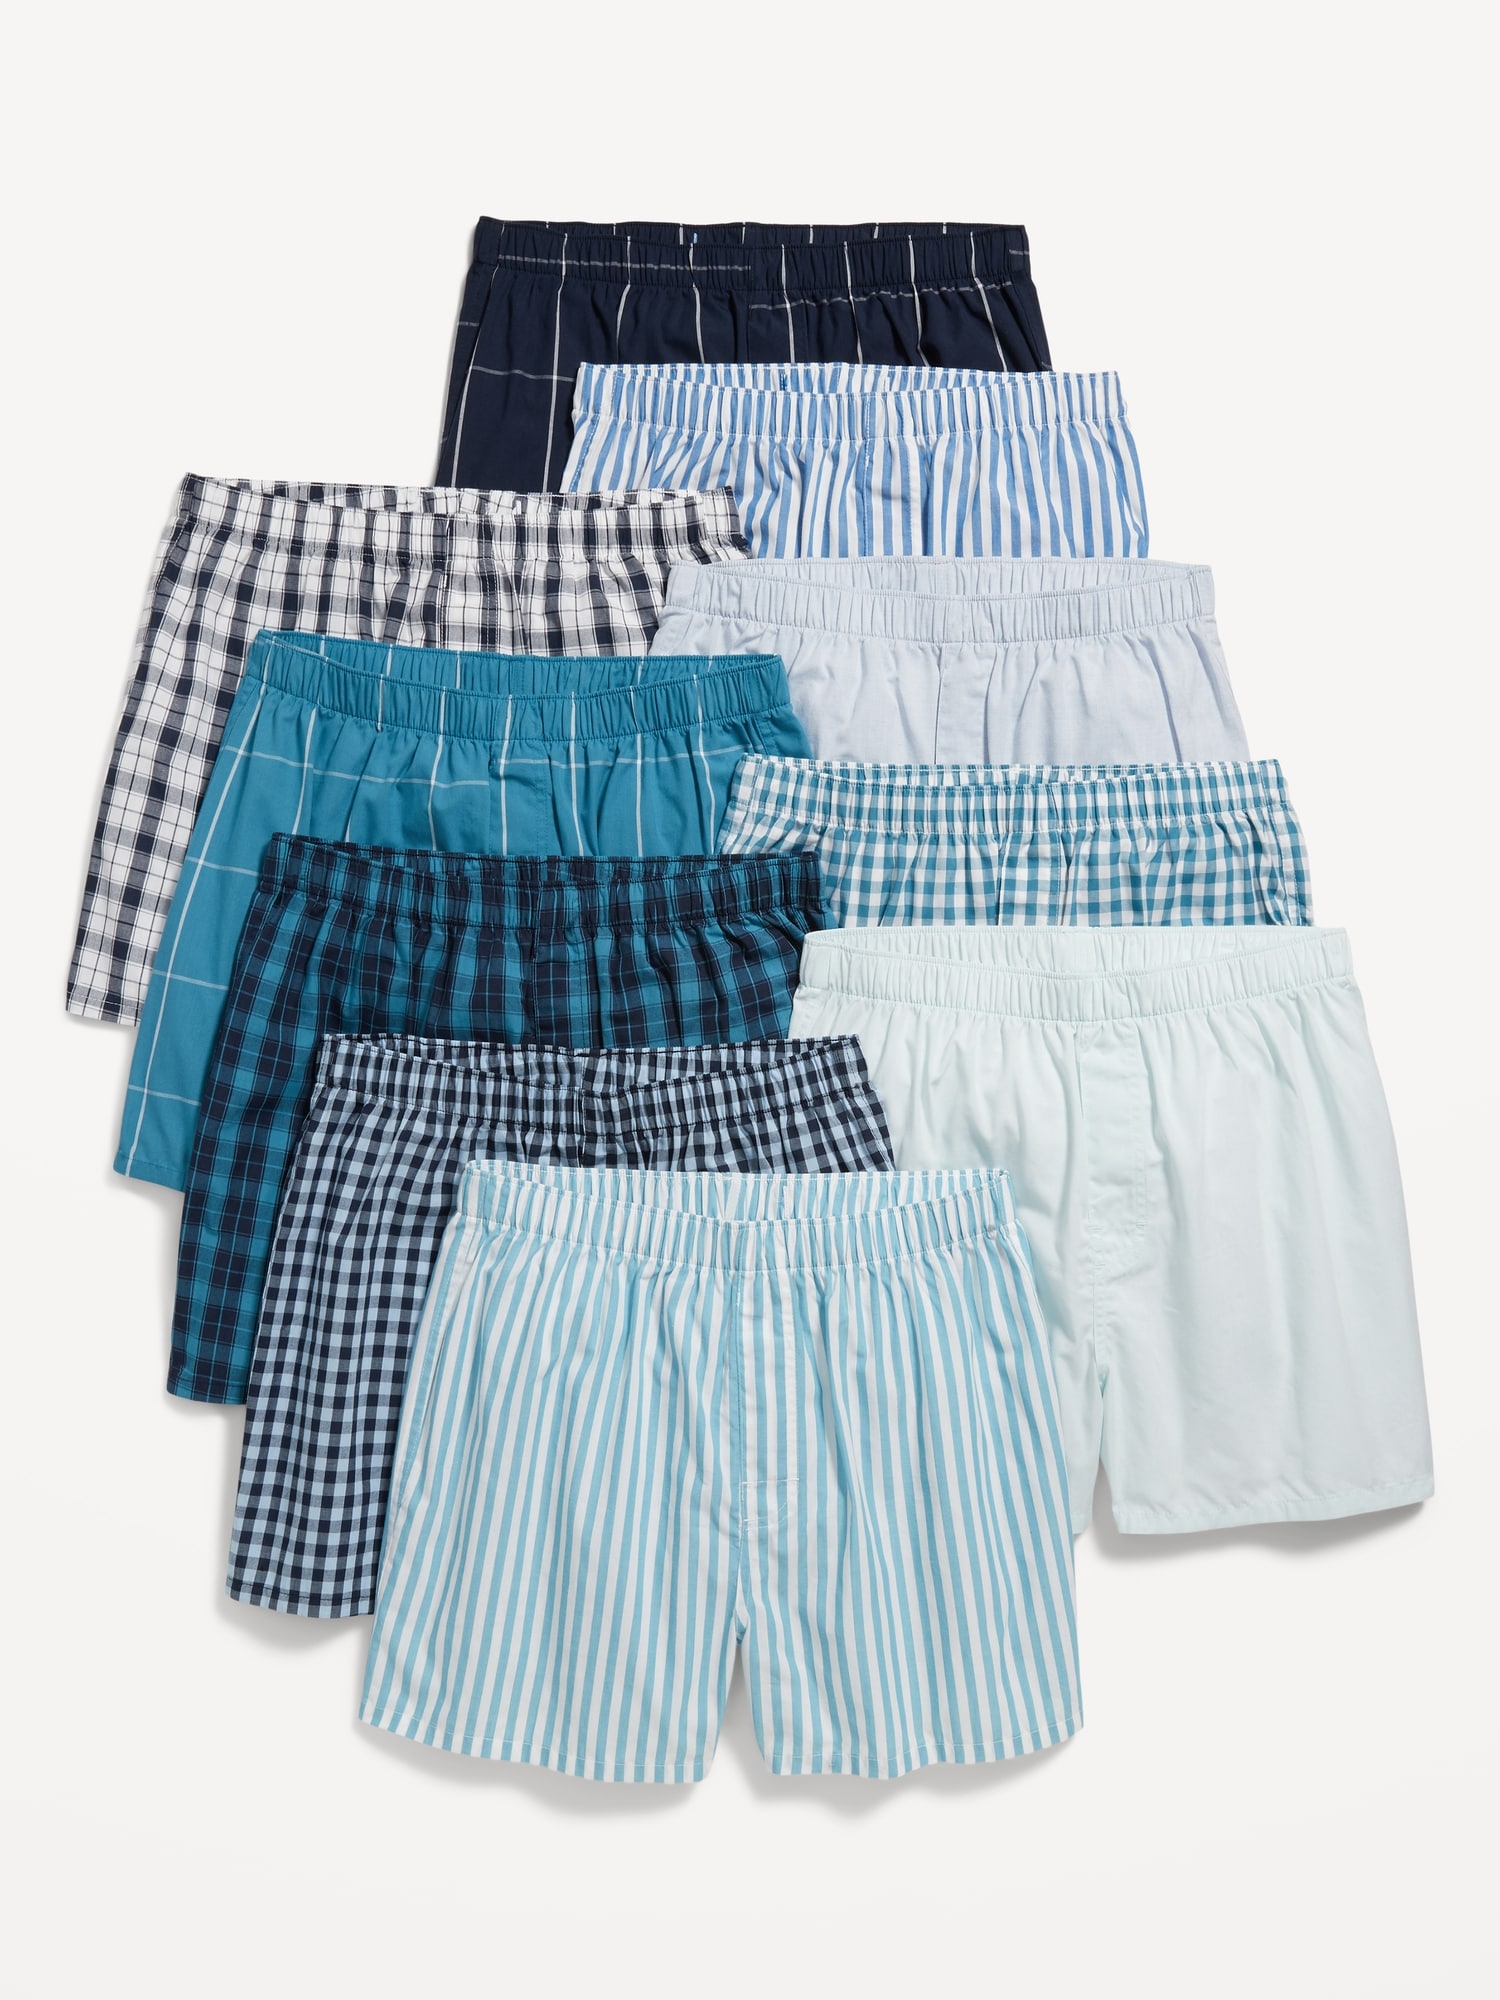 Old Navy Soft-Washed Boxer Shorts 10-Pack for Men -- 3.75-inch inseam blue. 1